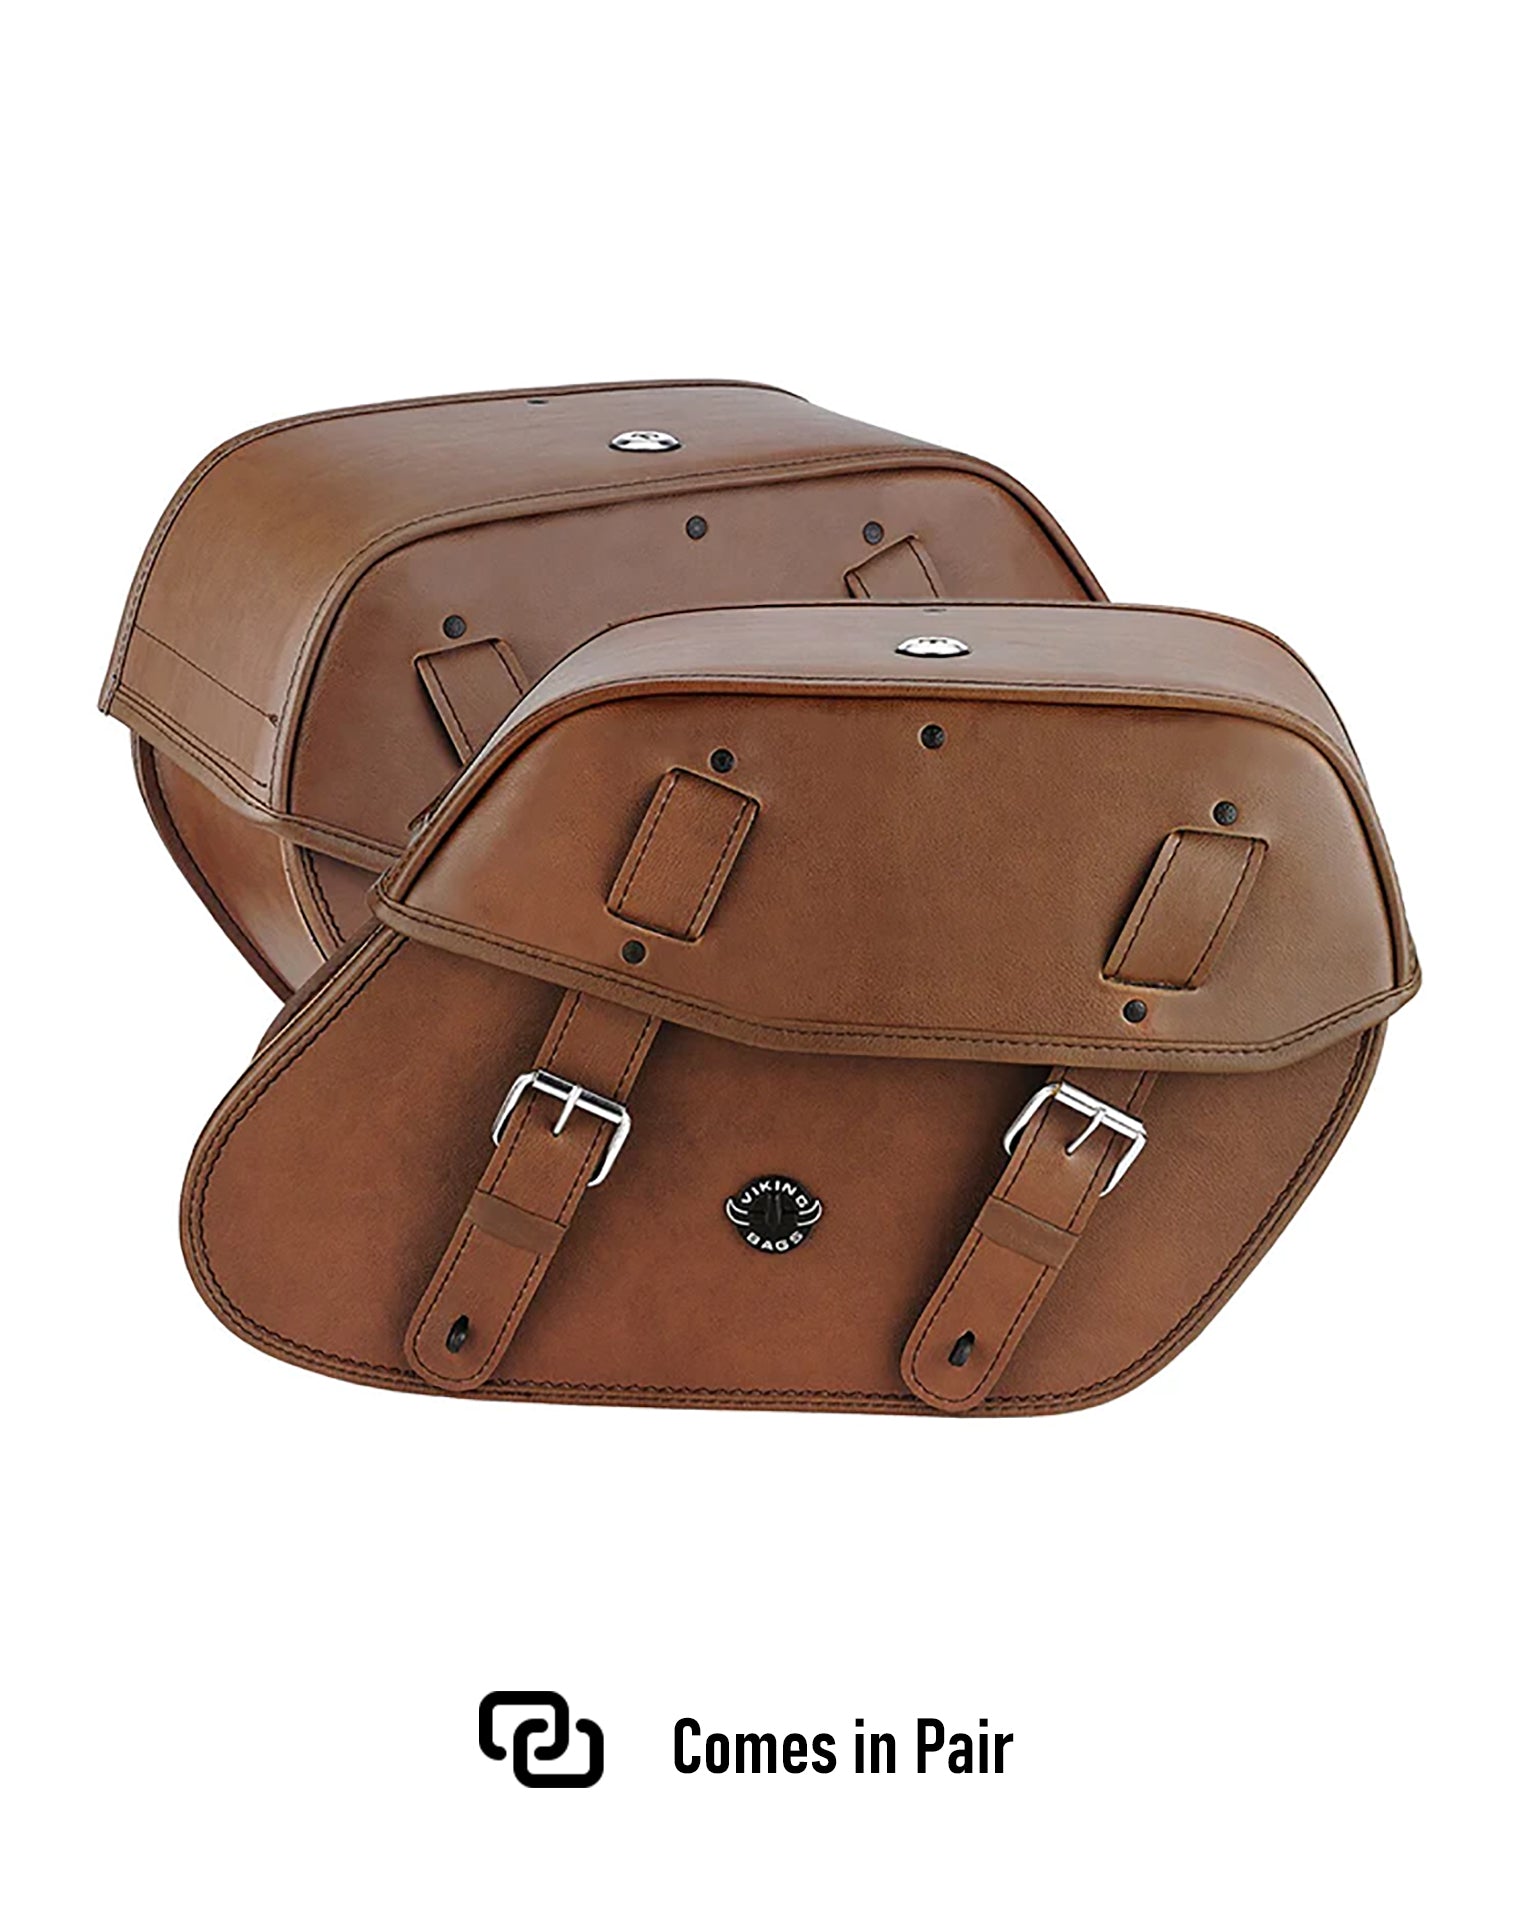 Viking Odin Brown Large Leather Motorcycle Saddlebags For Harley Softail Slim Weather Resistant Bags Comes in Pair